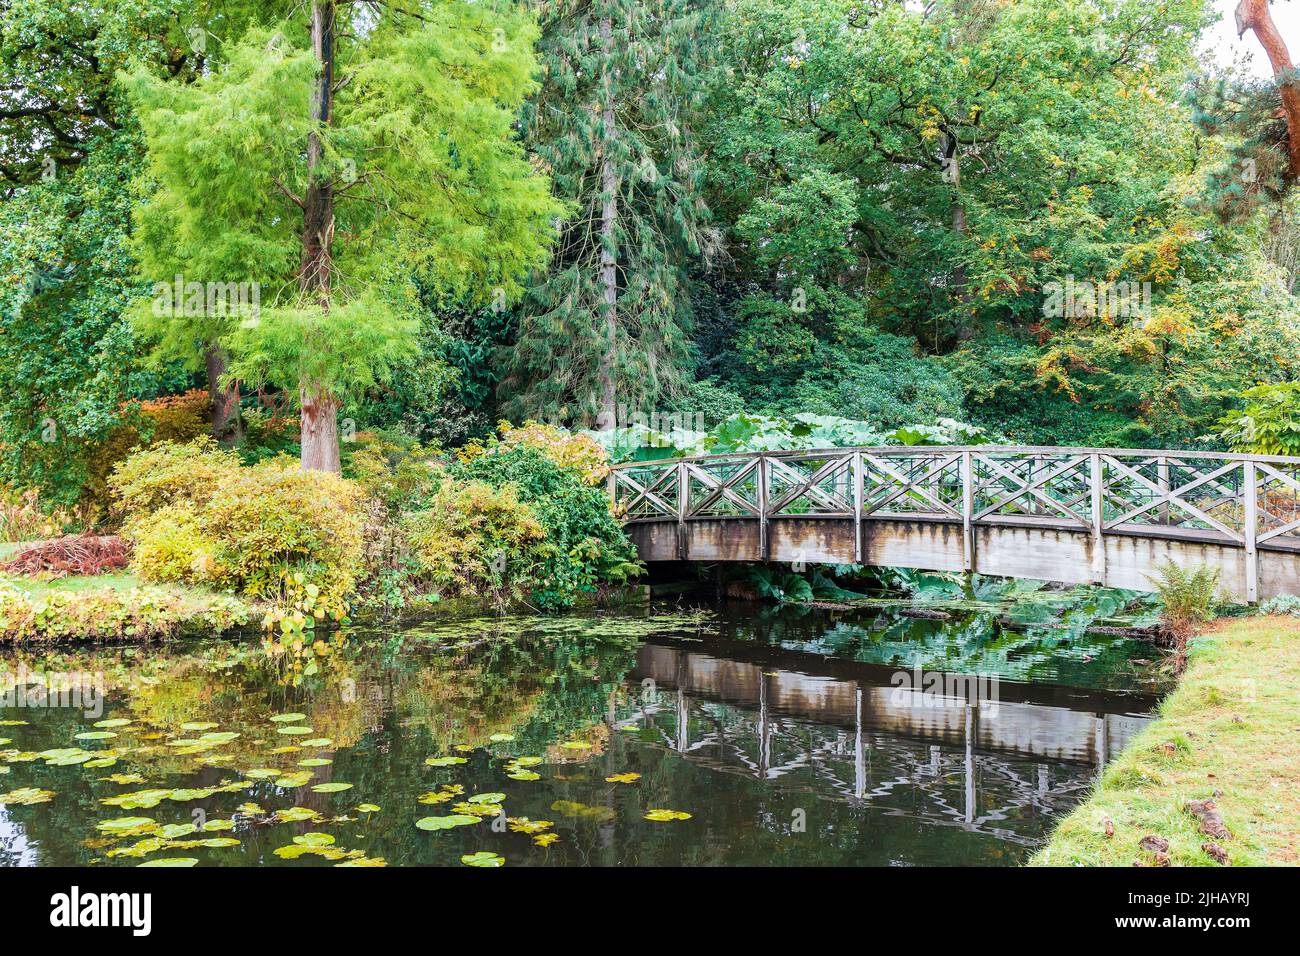 Small wooden bridge over a water feature in Tatton Park, an historic estate in Cheshire, England. Stock Photo